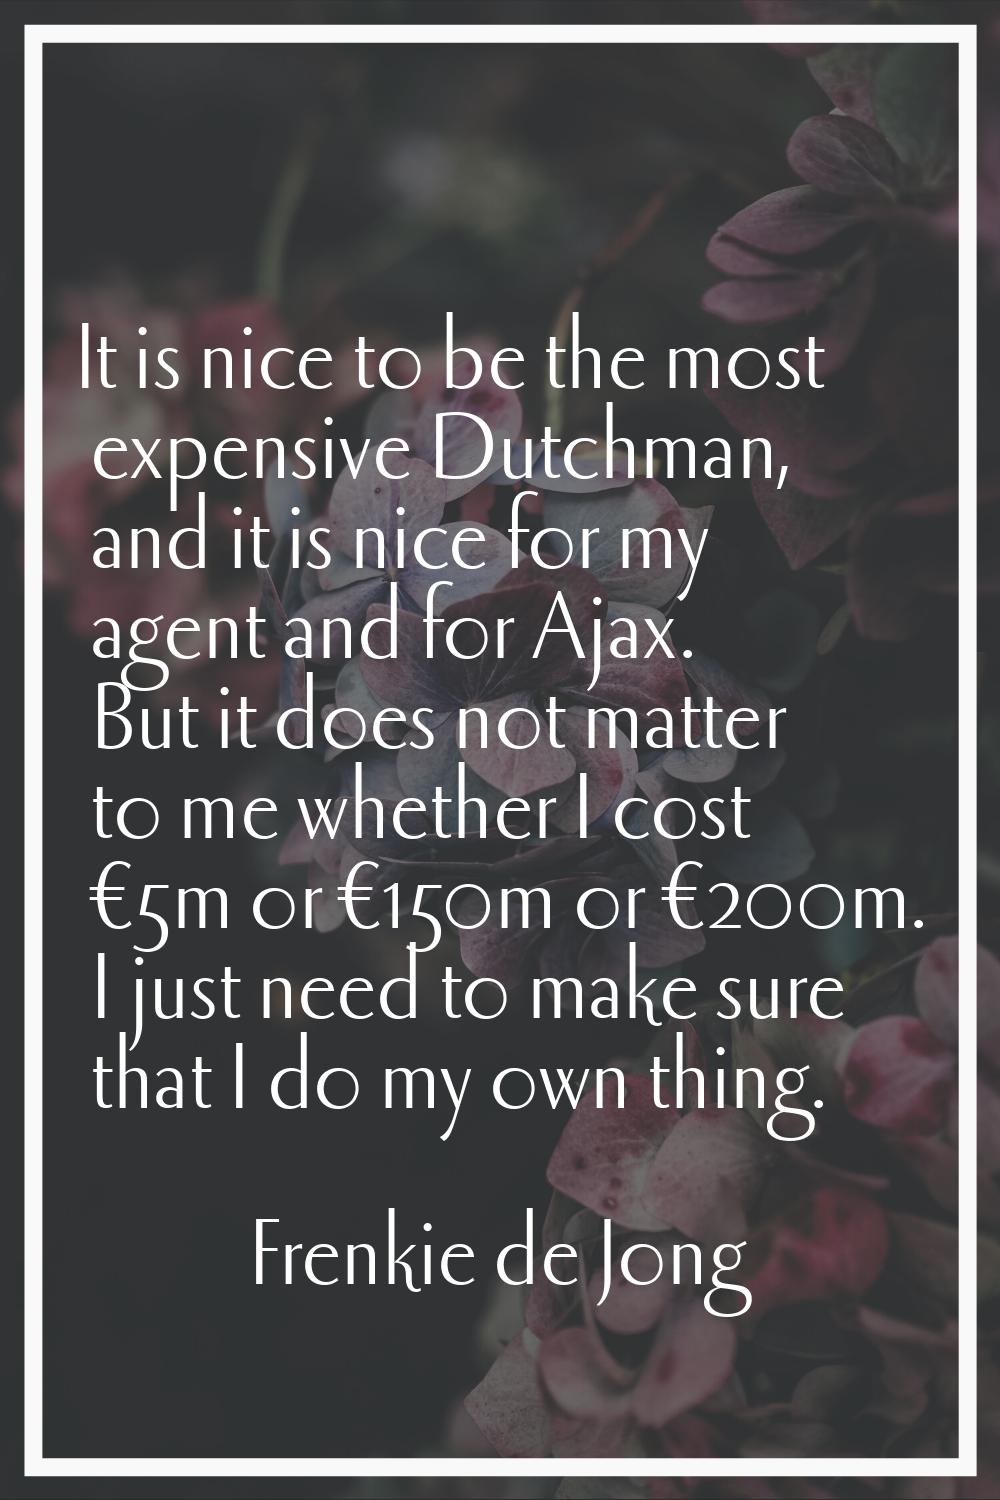 It is nice to be the most expensive Dutchman, and it is nice for my agent and for Ajax. But it does